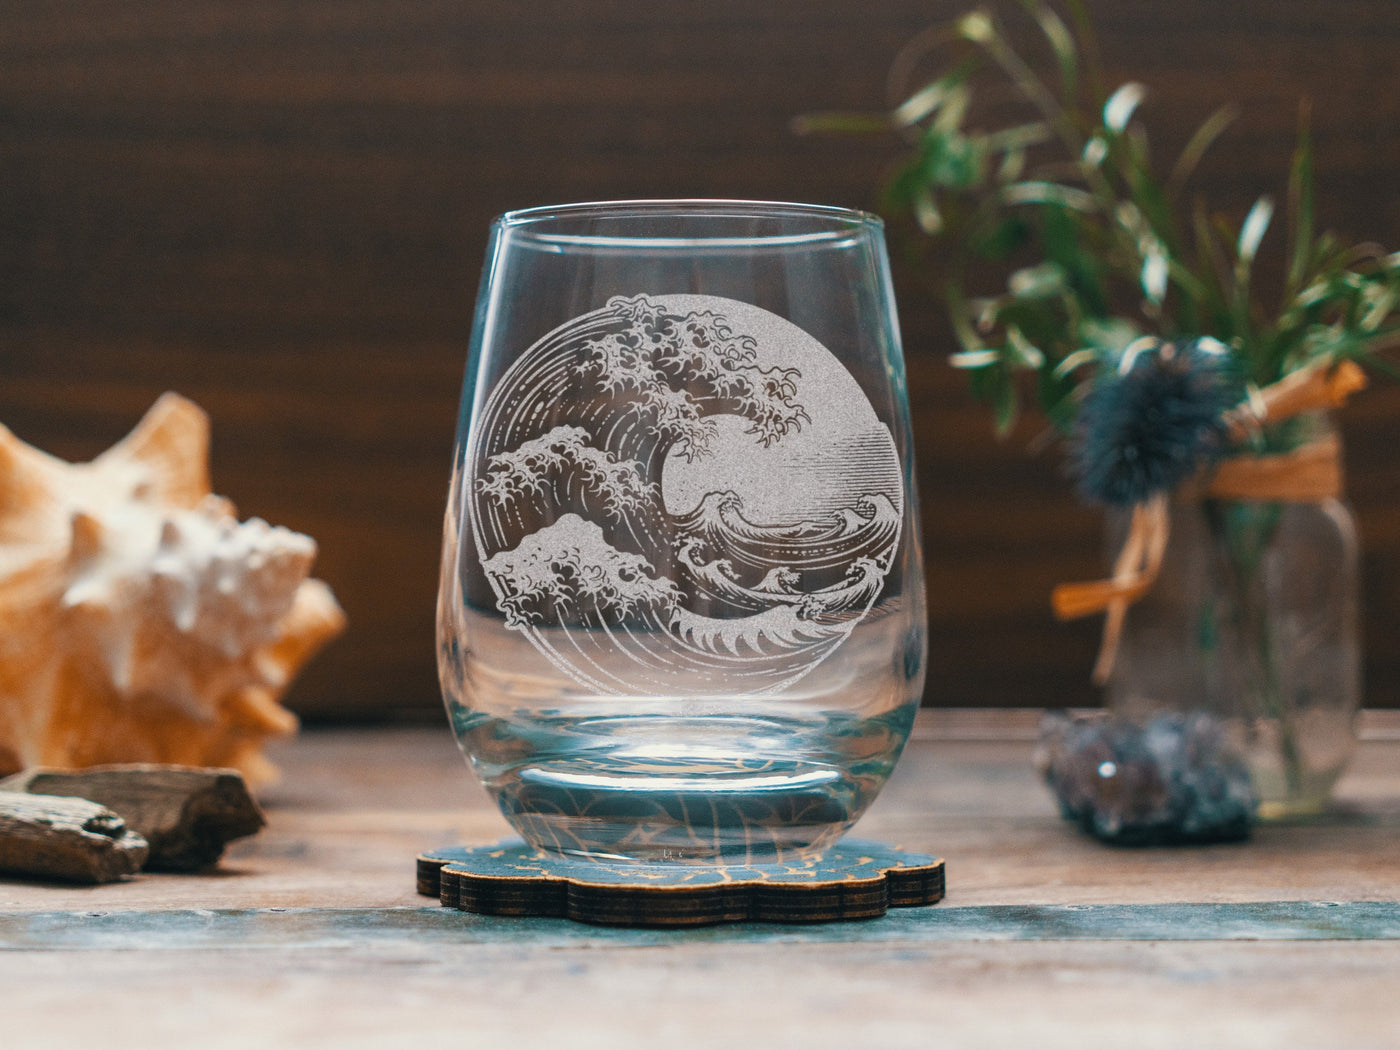 Crashing Wave Scene Glasses | Personalized etched beer, whiskey, wine & cocktail glassware. Beach Coast Lifestyle gift, Tropical Summer Vibe